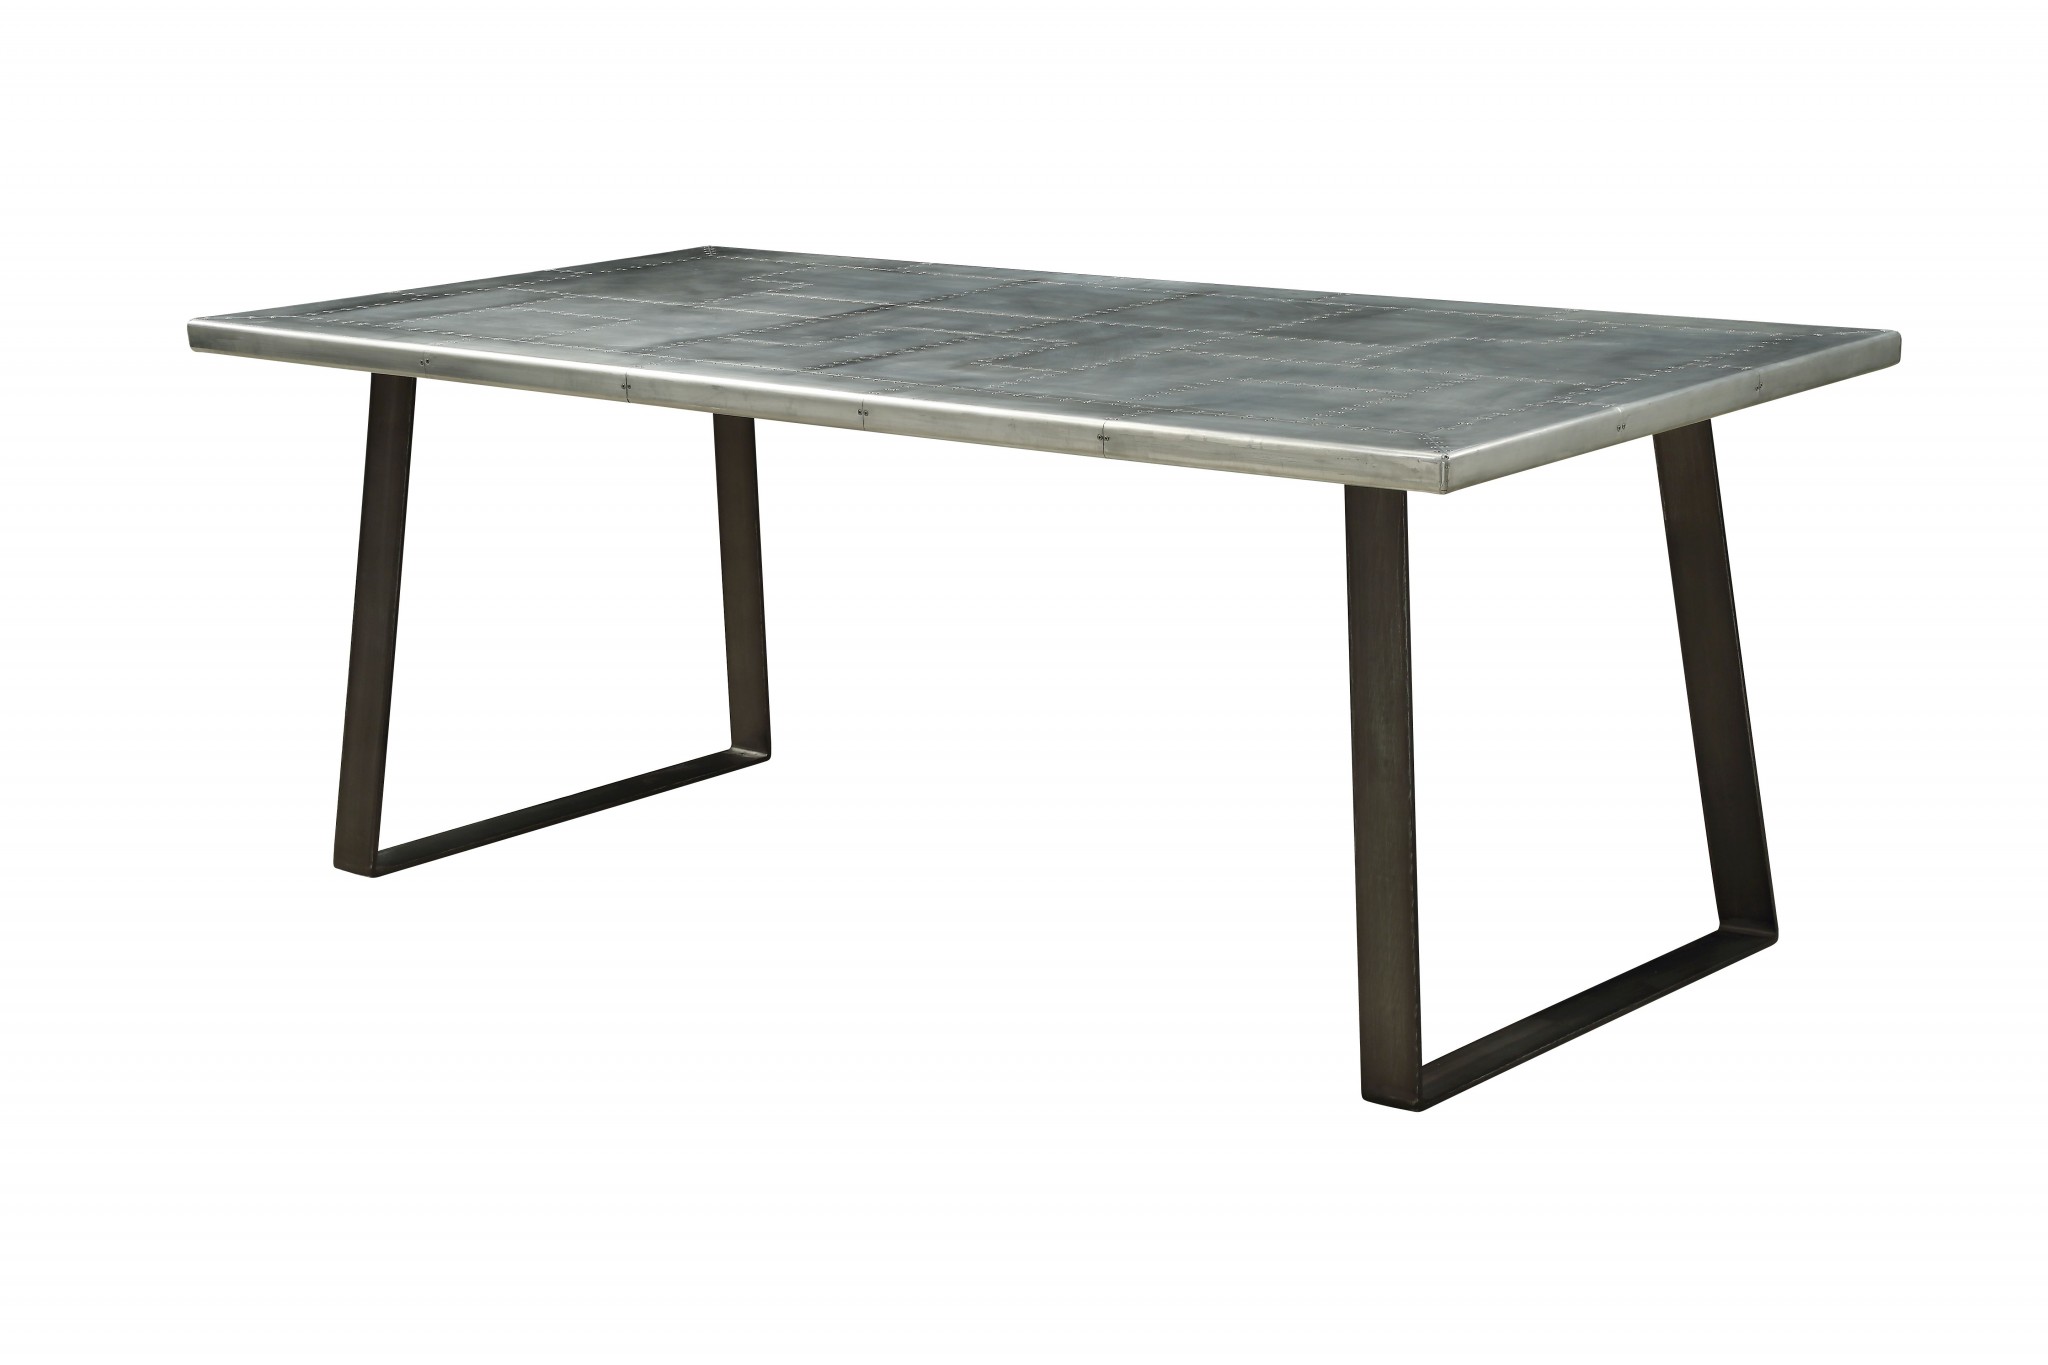 78" X 40" X 30" Aluminum And Gunmetal Dining Table